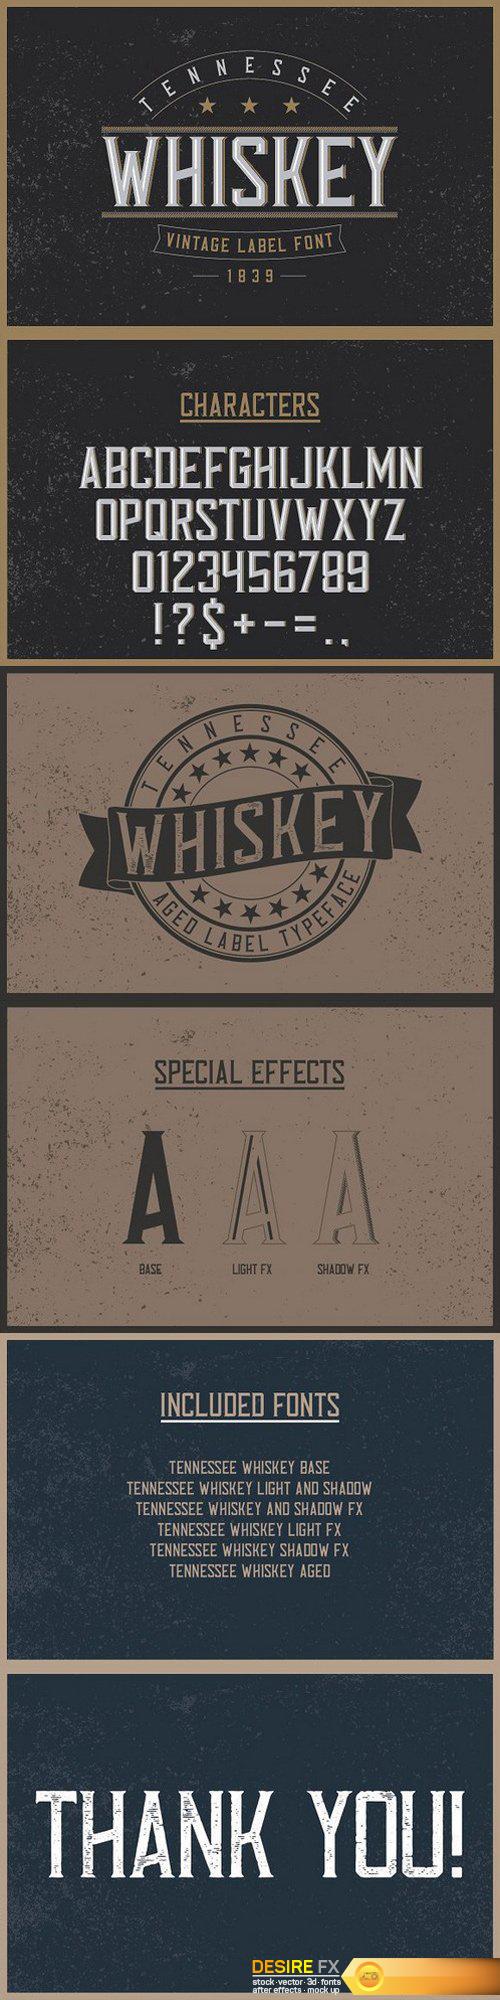 CM - Tennessee Whiskey label font 1343148